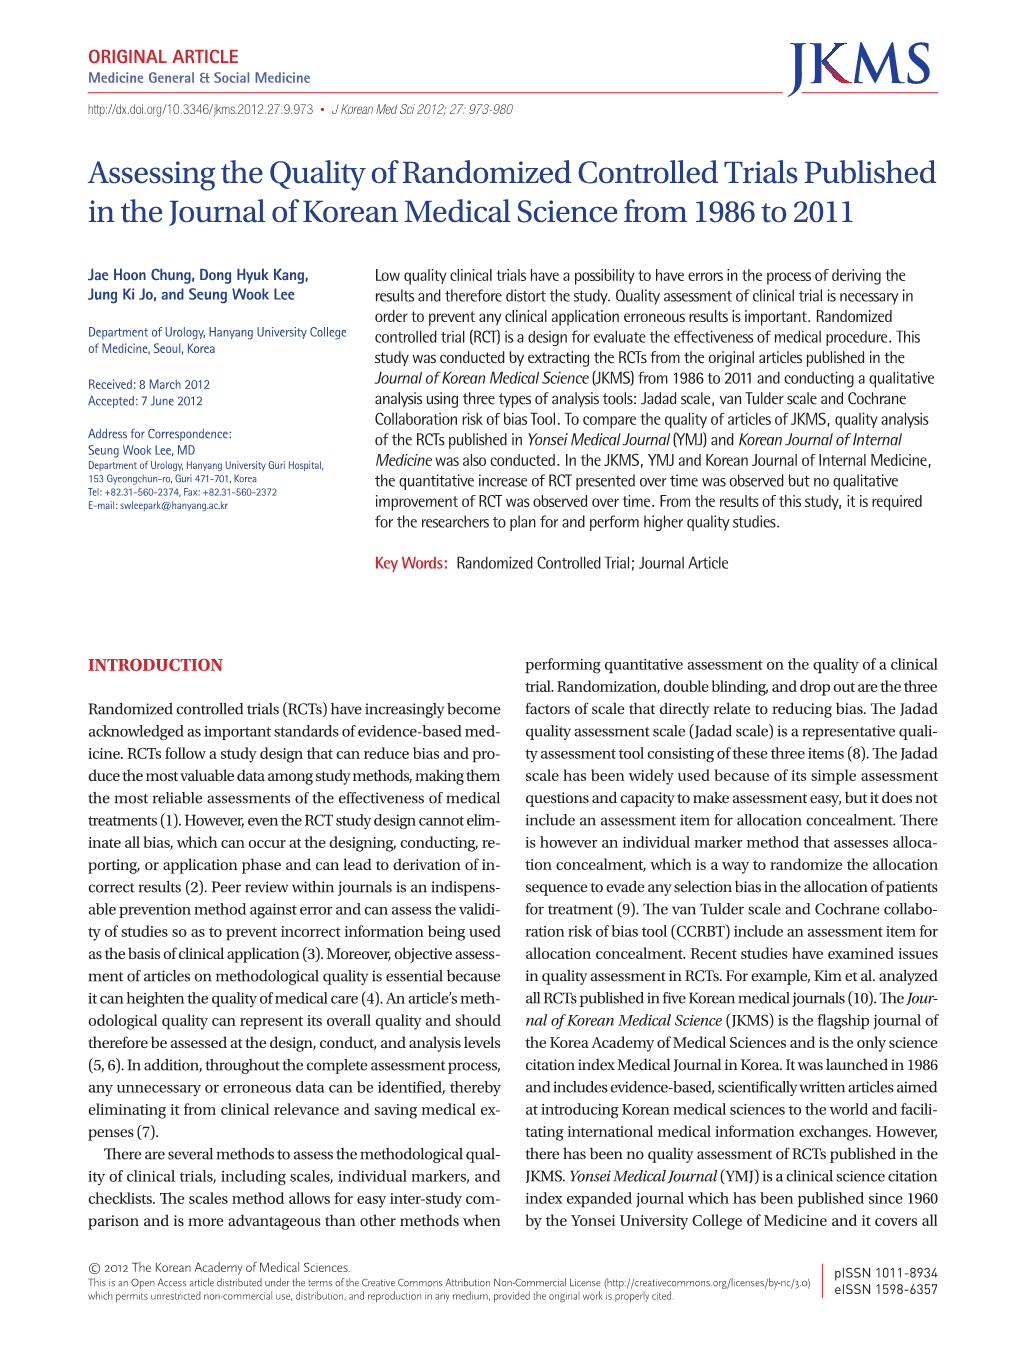 Assessing the Quality of Randomized Controlled Trials Published in the Journal of Korean Medical Science from 1986 to 2011